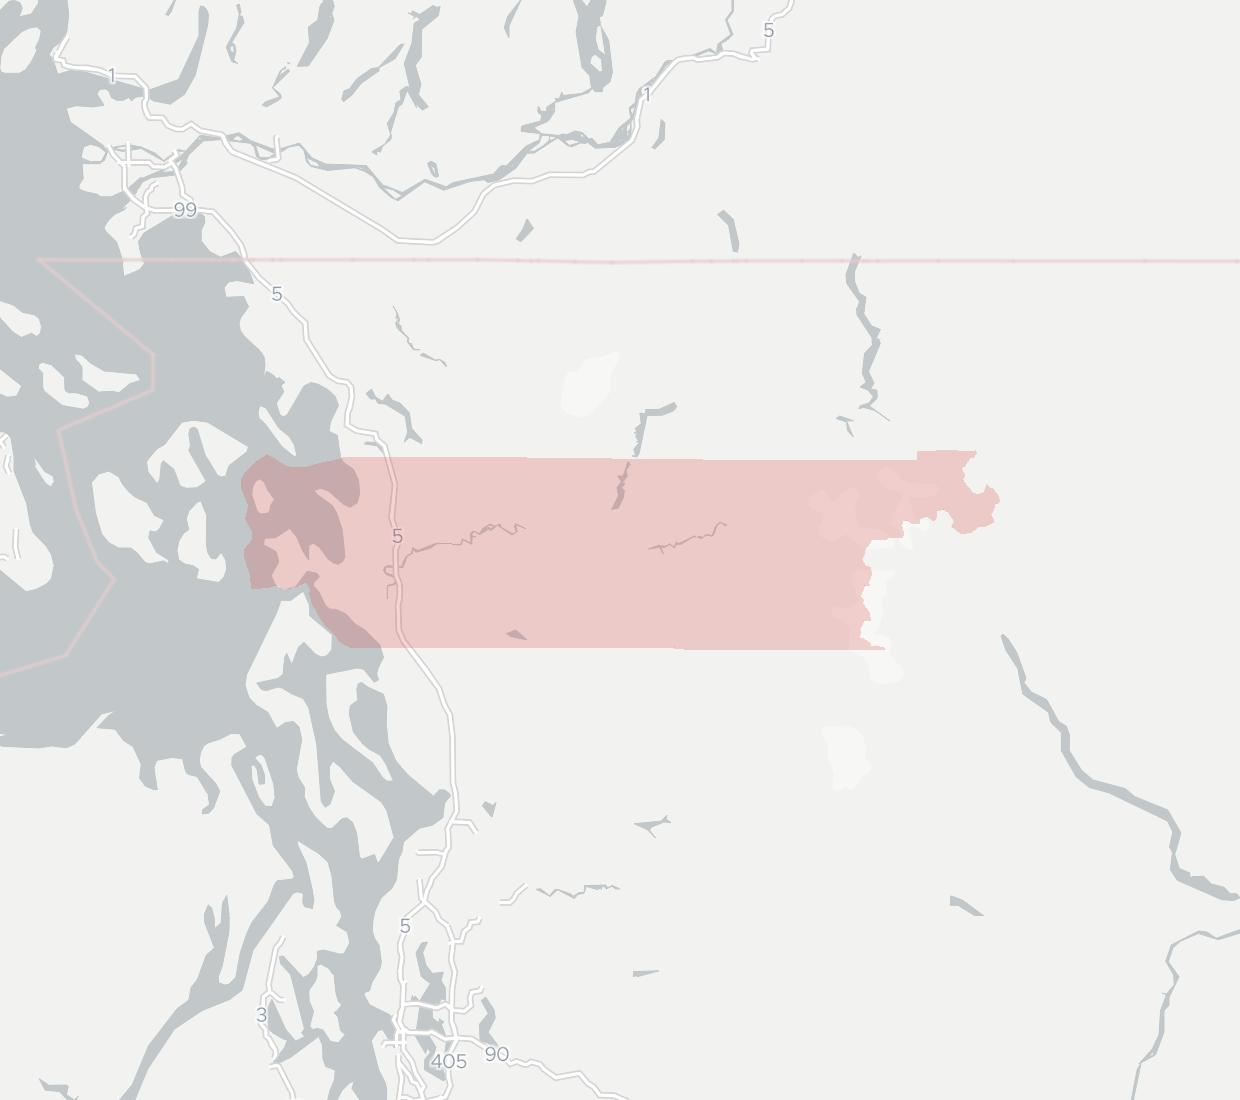 Access - Anacortes Fiber Internet Availability Map. Click for interactive map